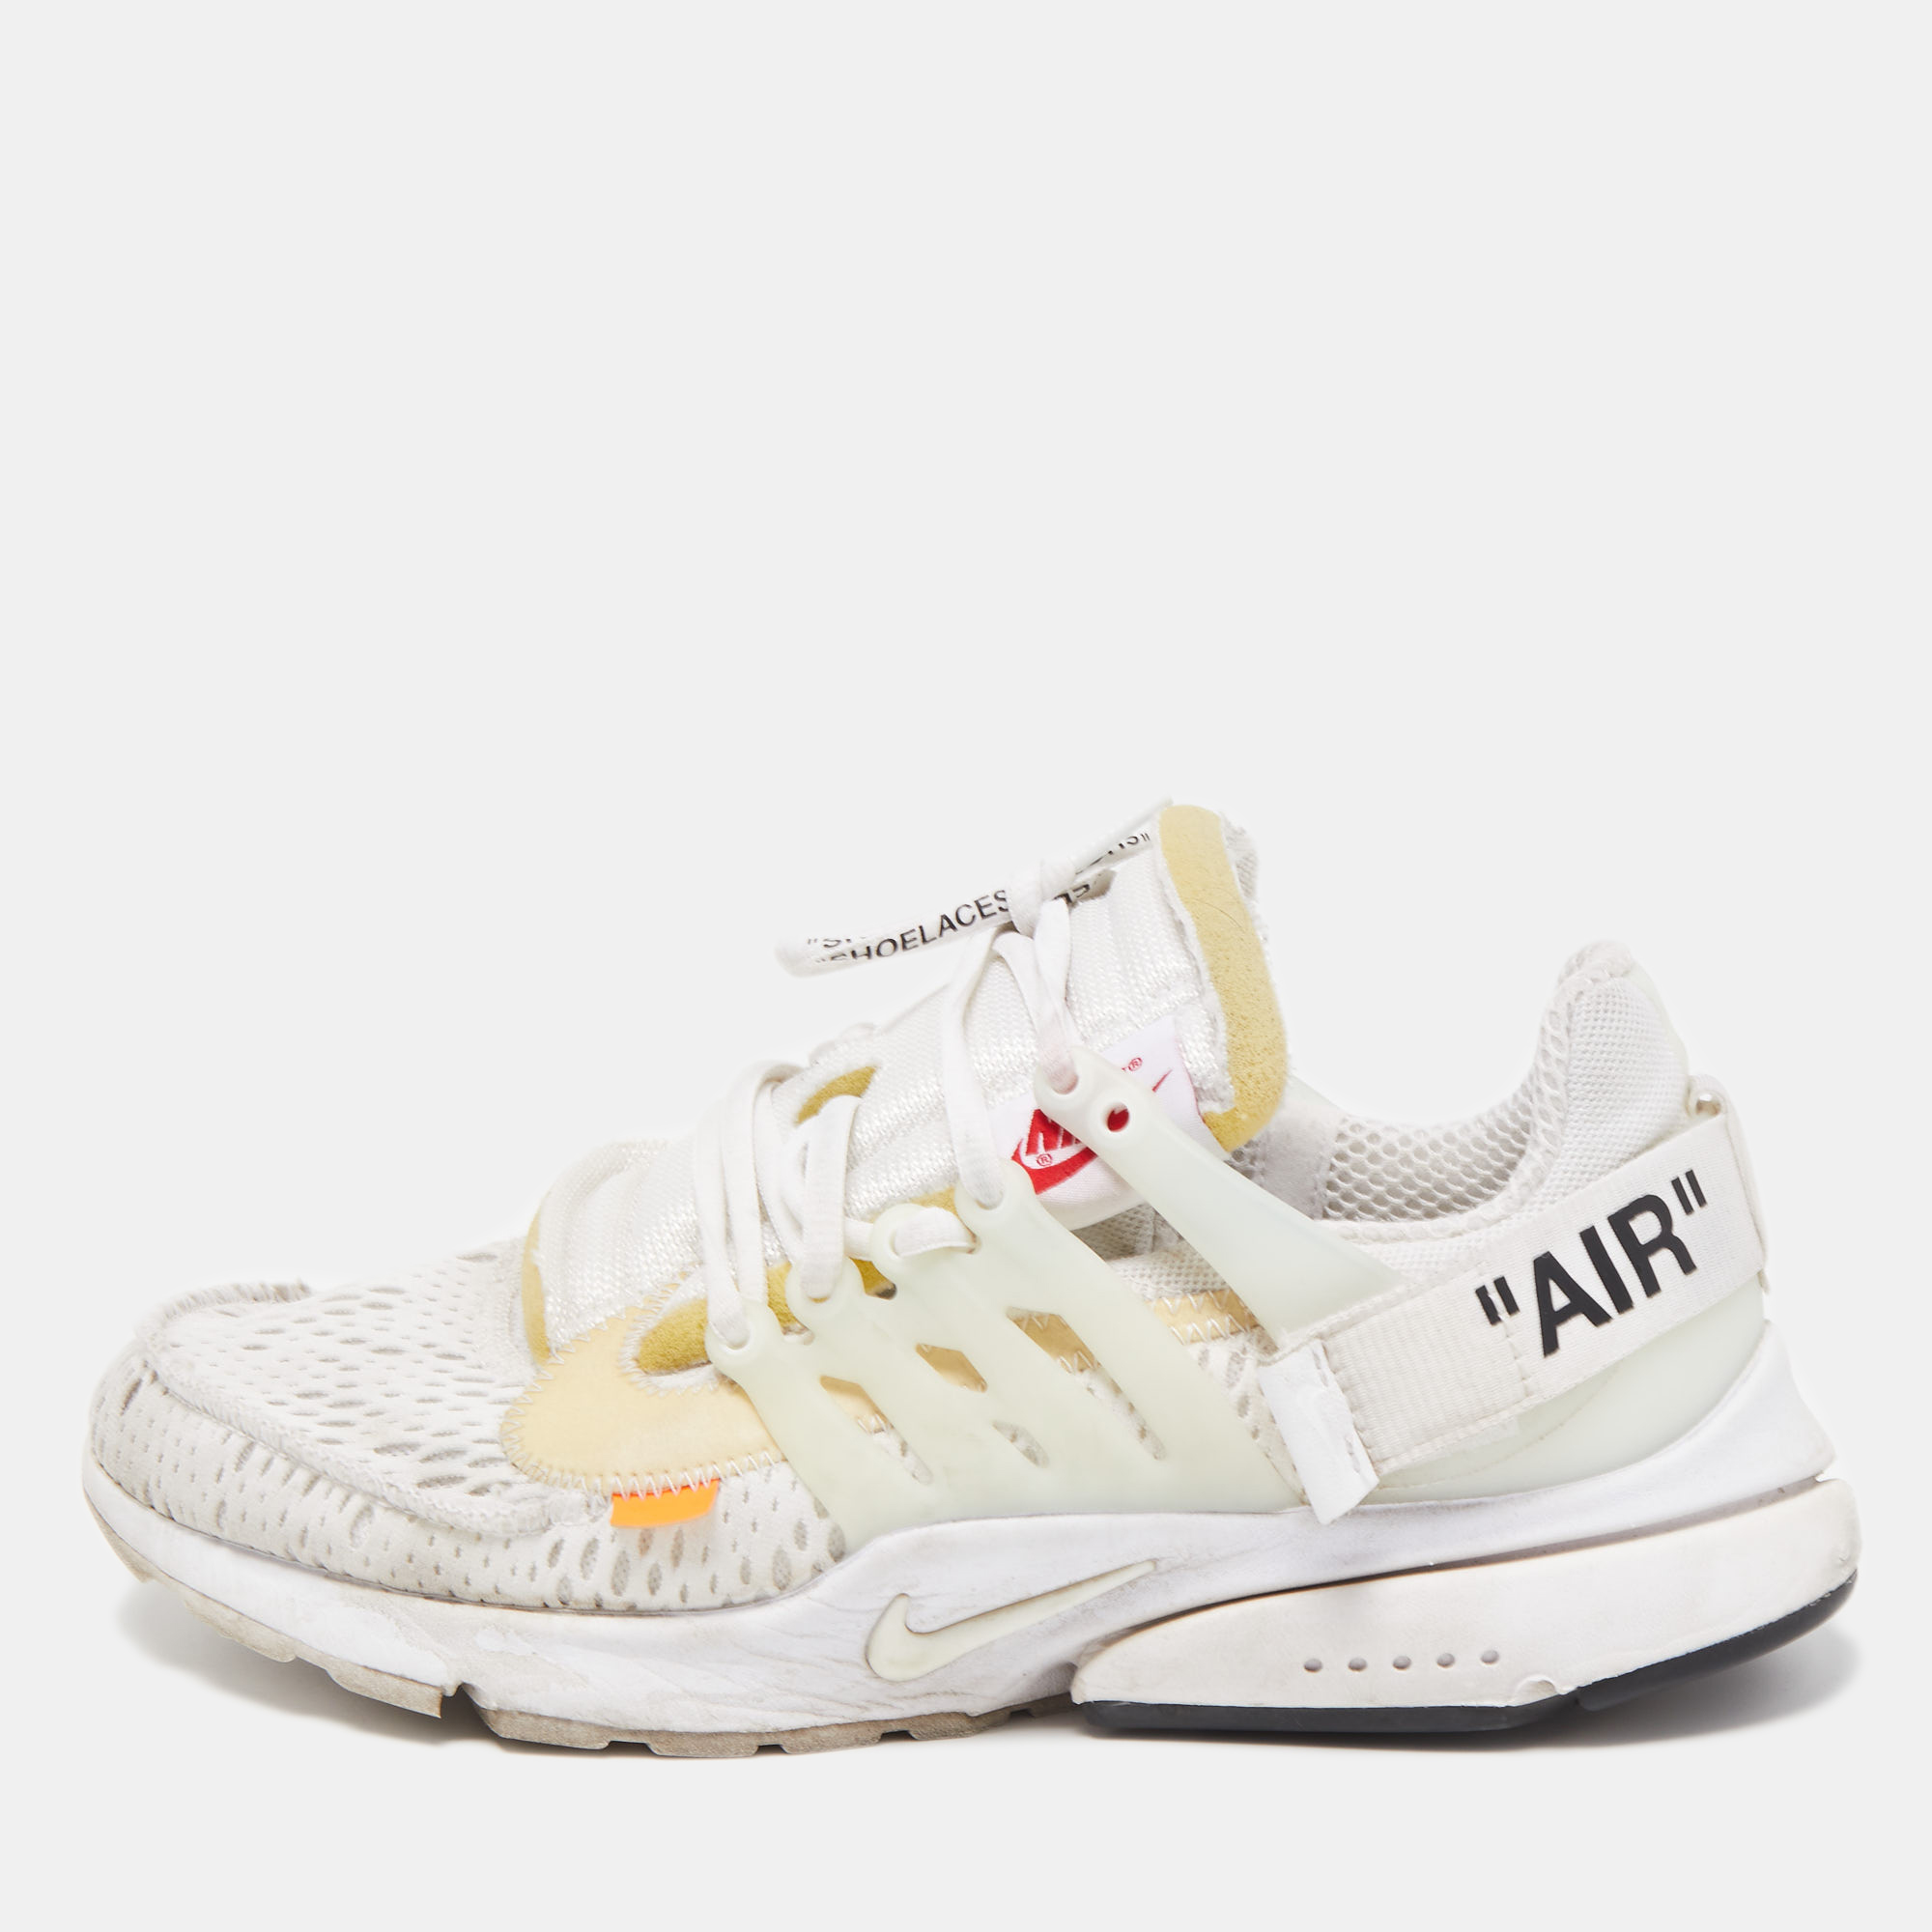 Off-white x nike nike x off white  white fabric air presto low trainers sneakers size 42.5